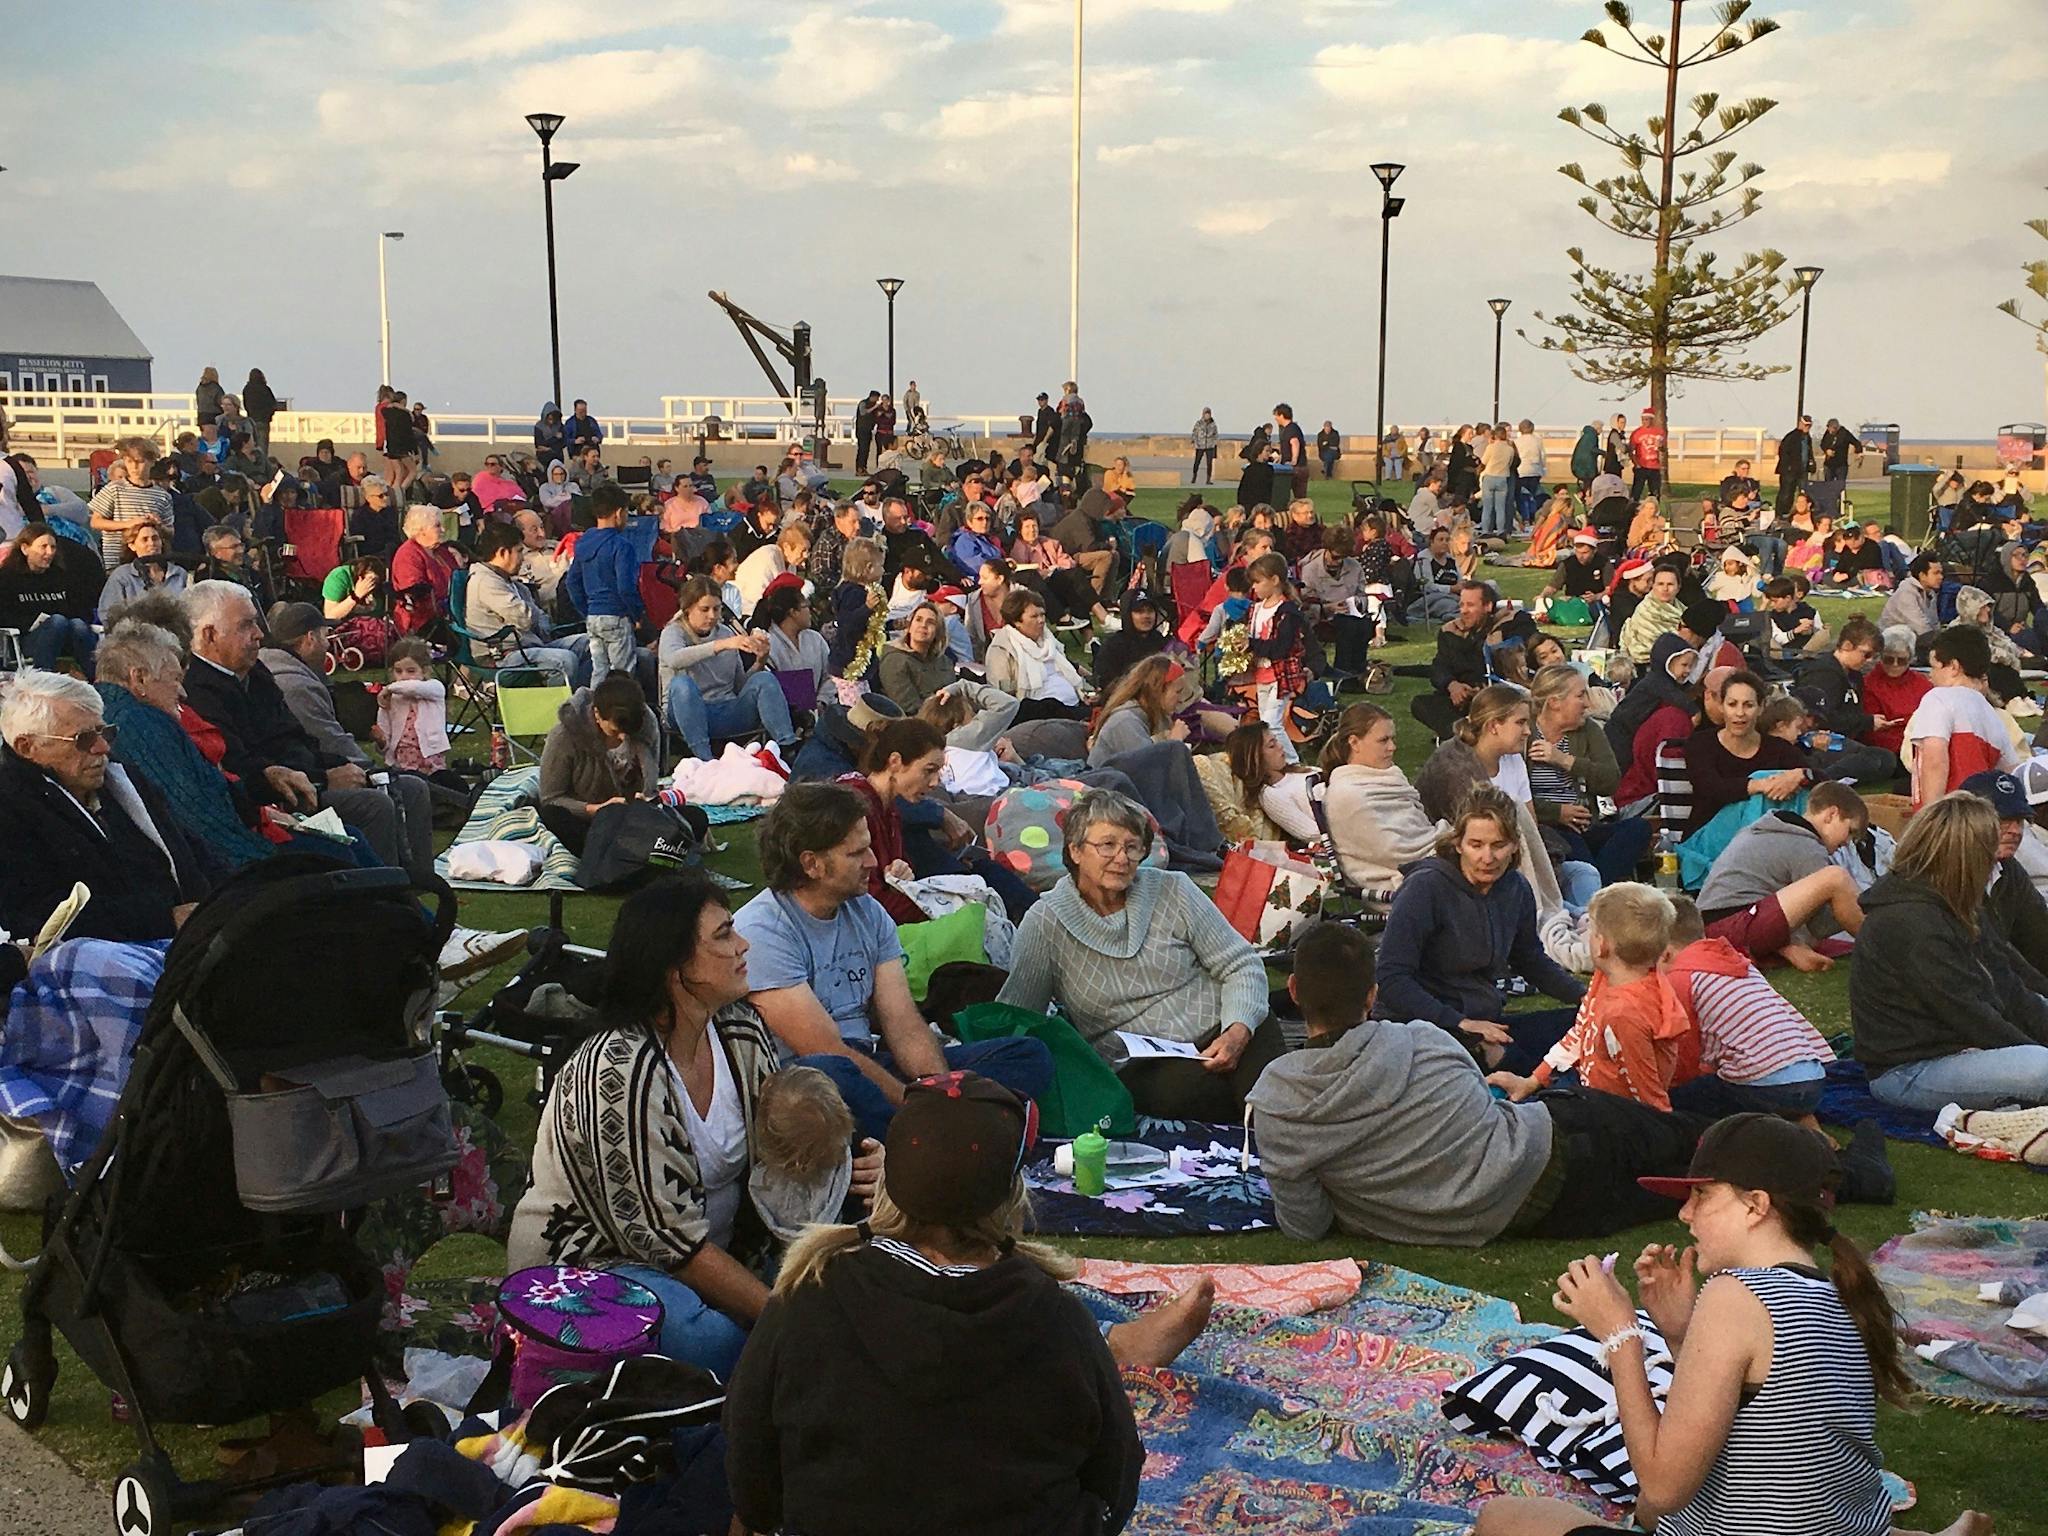 Carols by the Jetty